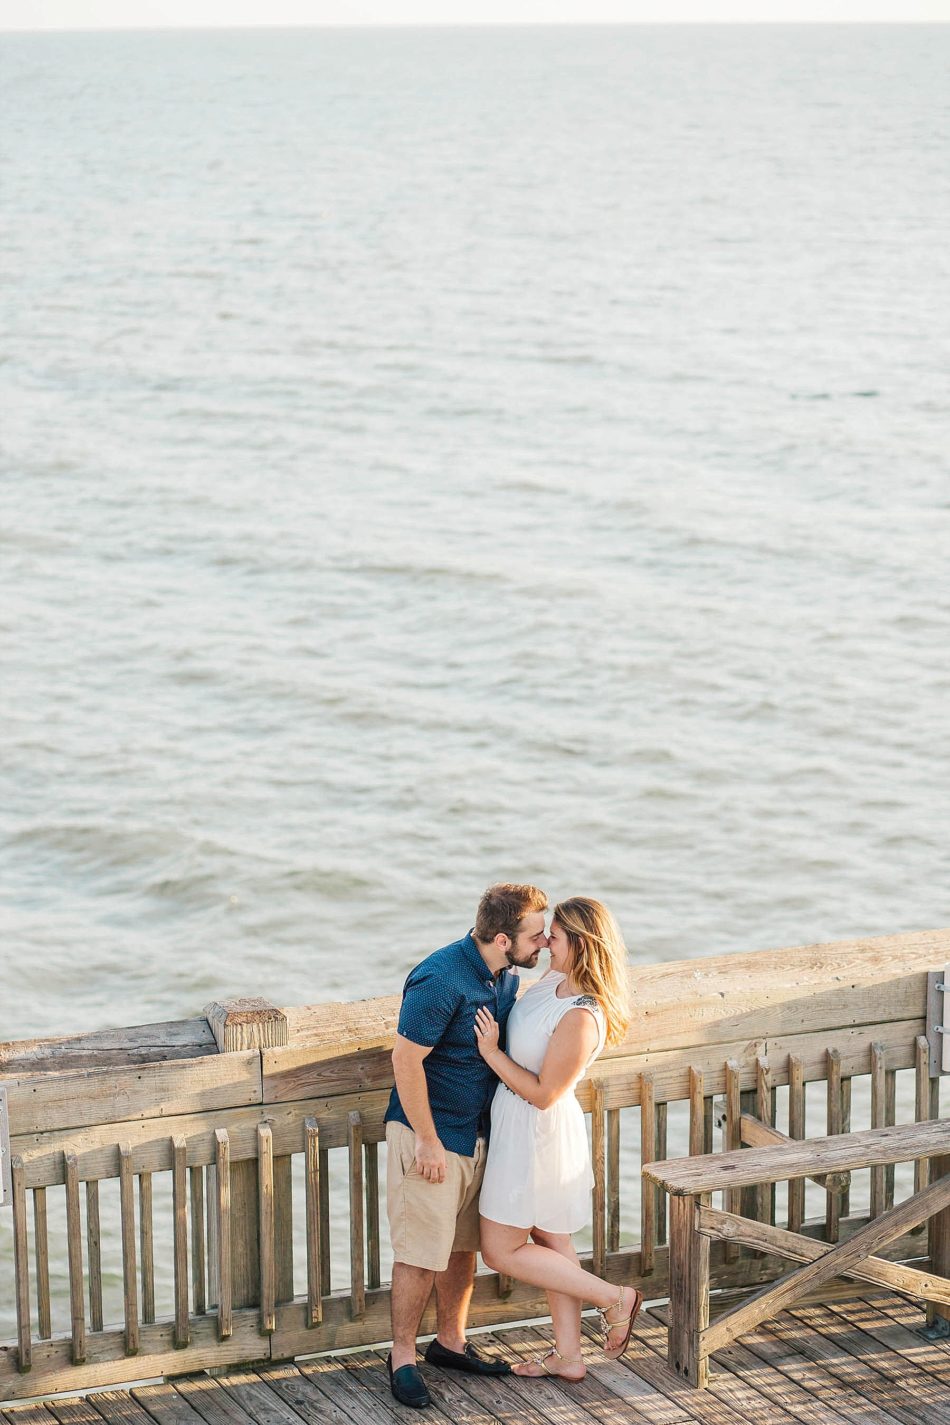 Engaged Couple kiss on pier, Folly beach in Charleston, South Carolina Kate Timbers Photography. http://katetimbers.com #katetimbersphotography // Charleston Photography // Inspiration